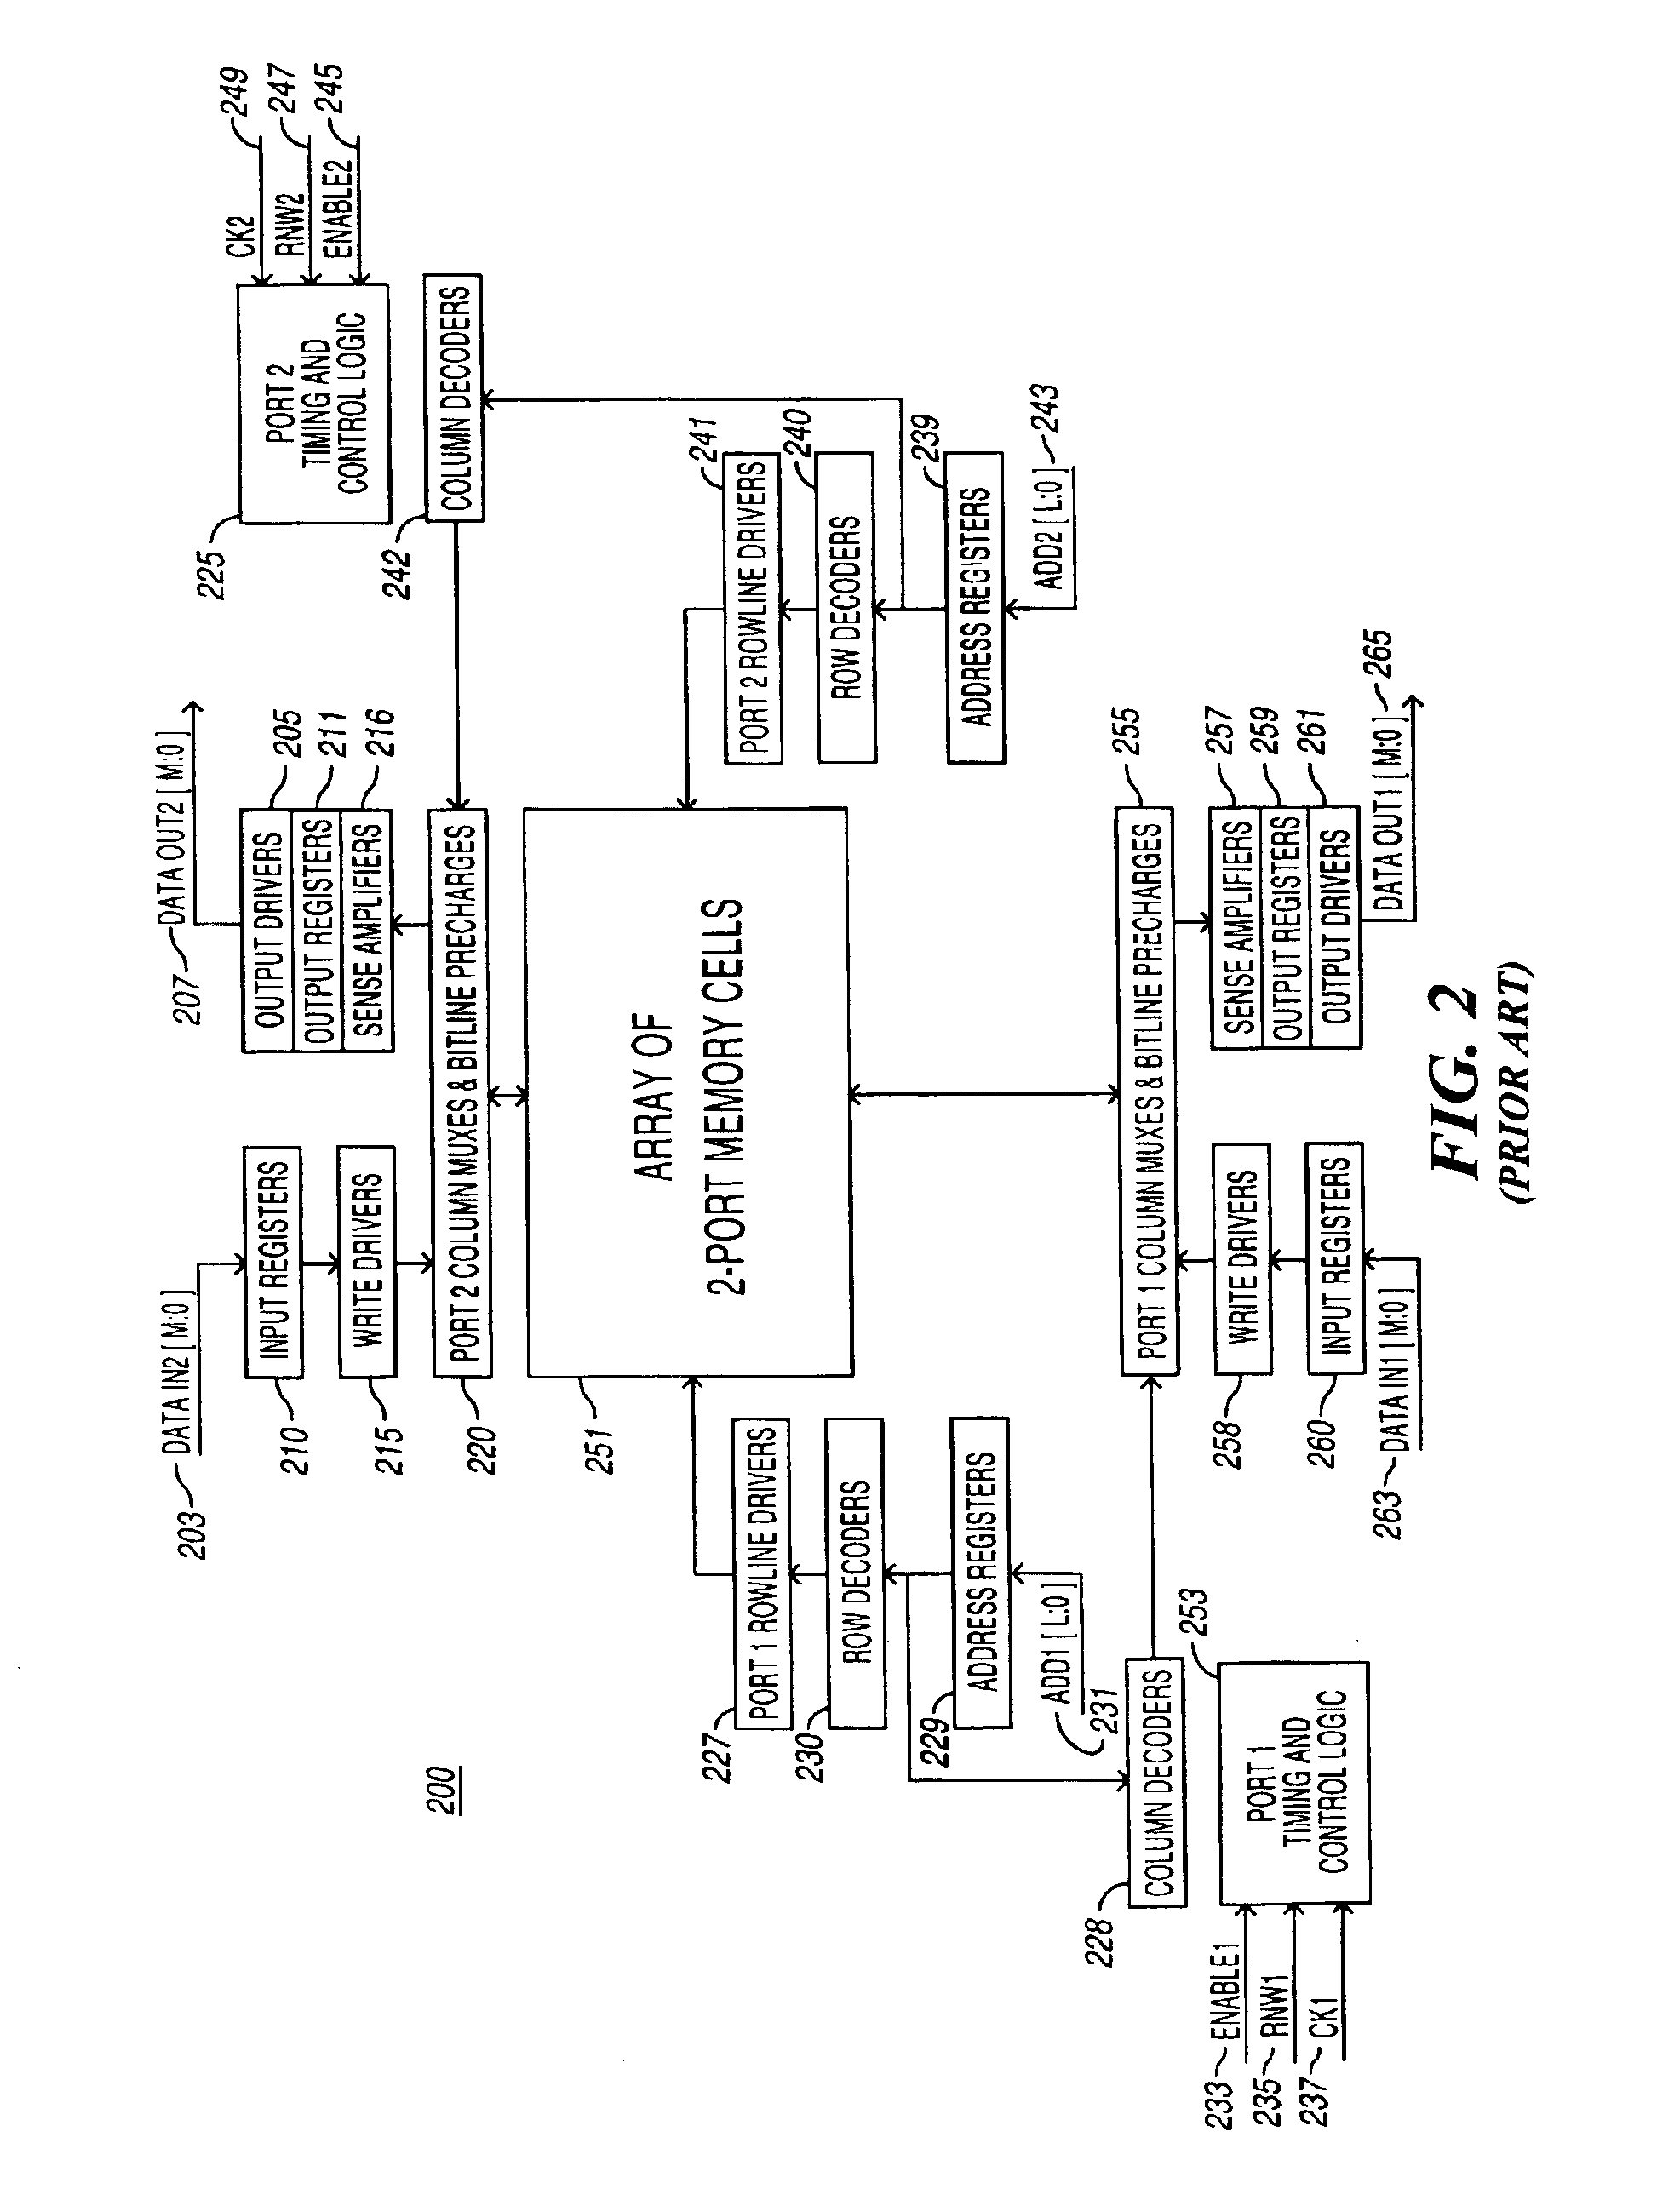 Method and apparatus for providing pseudo 2-port RAM functionality using a 1-port memory cell